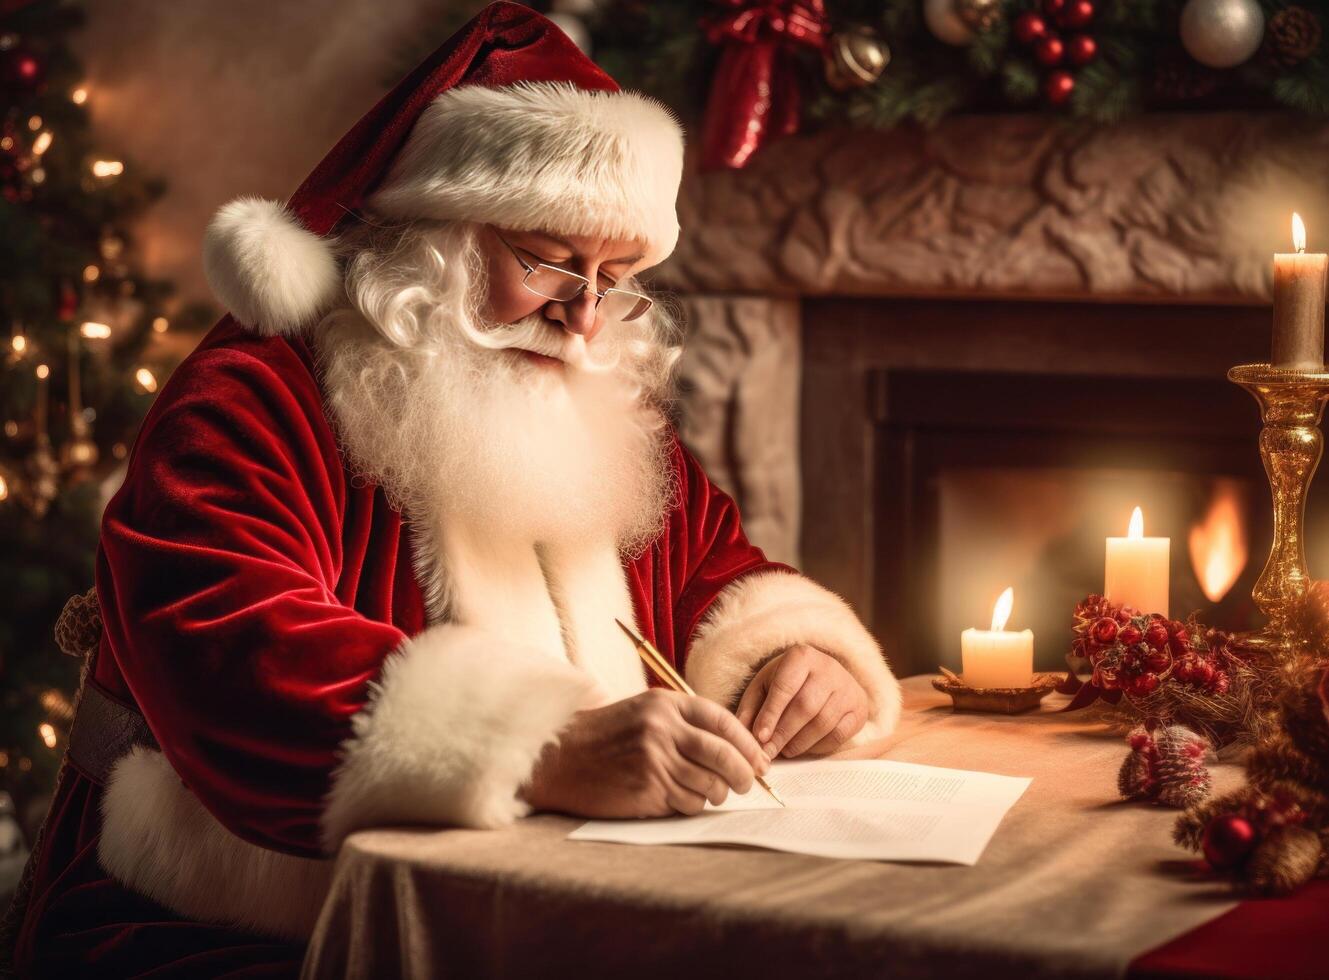 Santa Claus with letters. Illustration photo